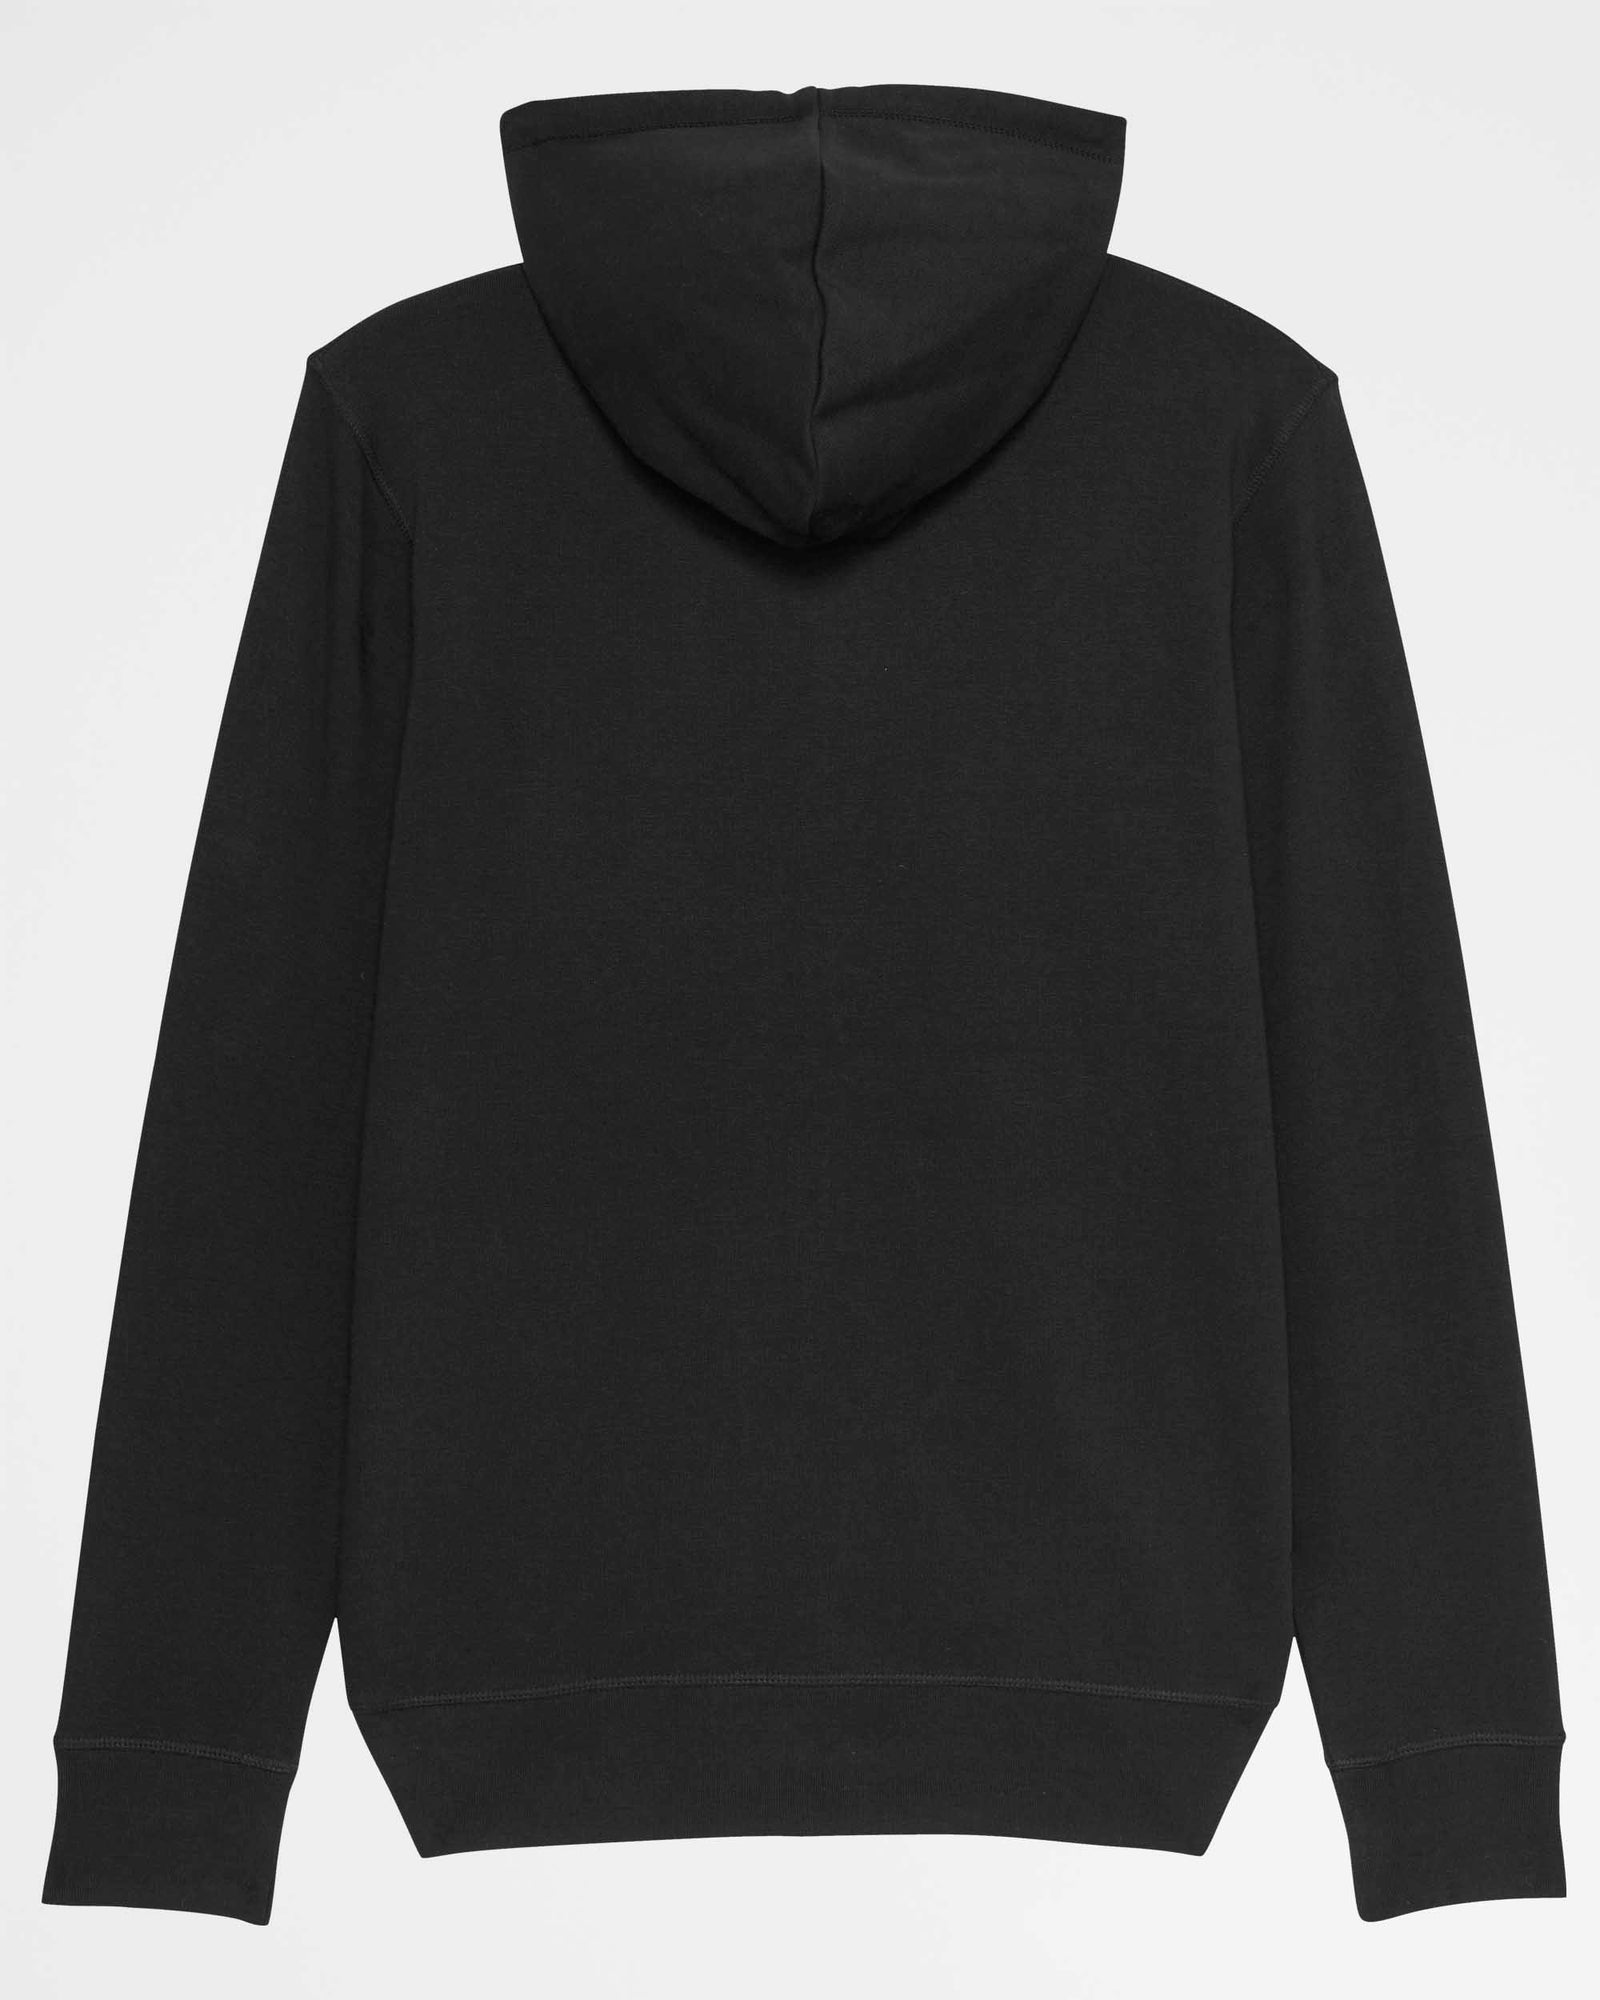 Pack It Up | 3-Style Hoodie